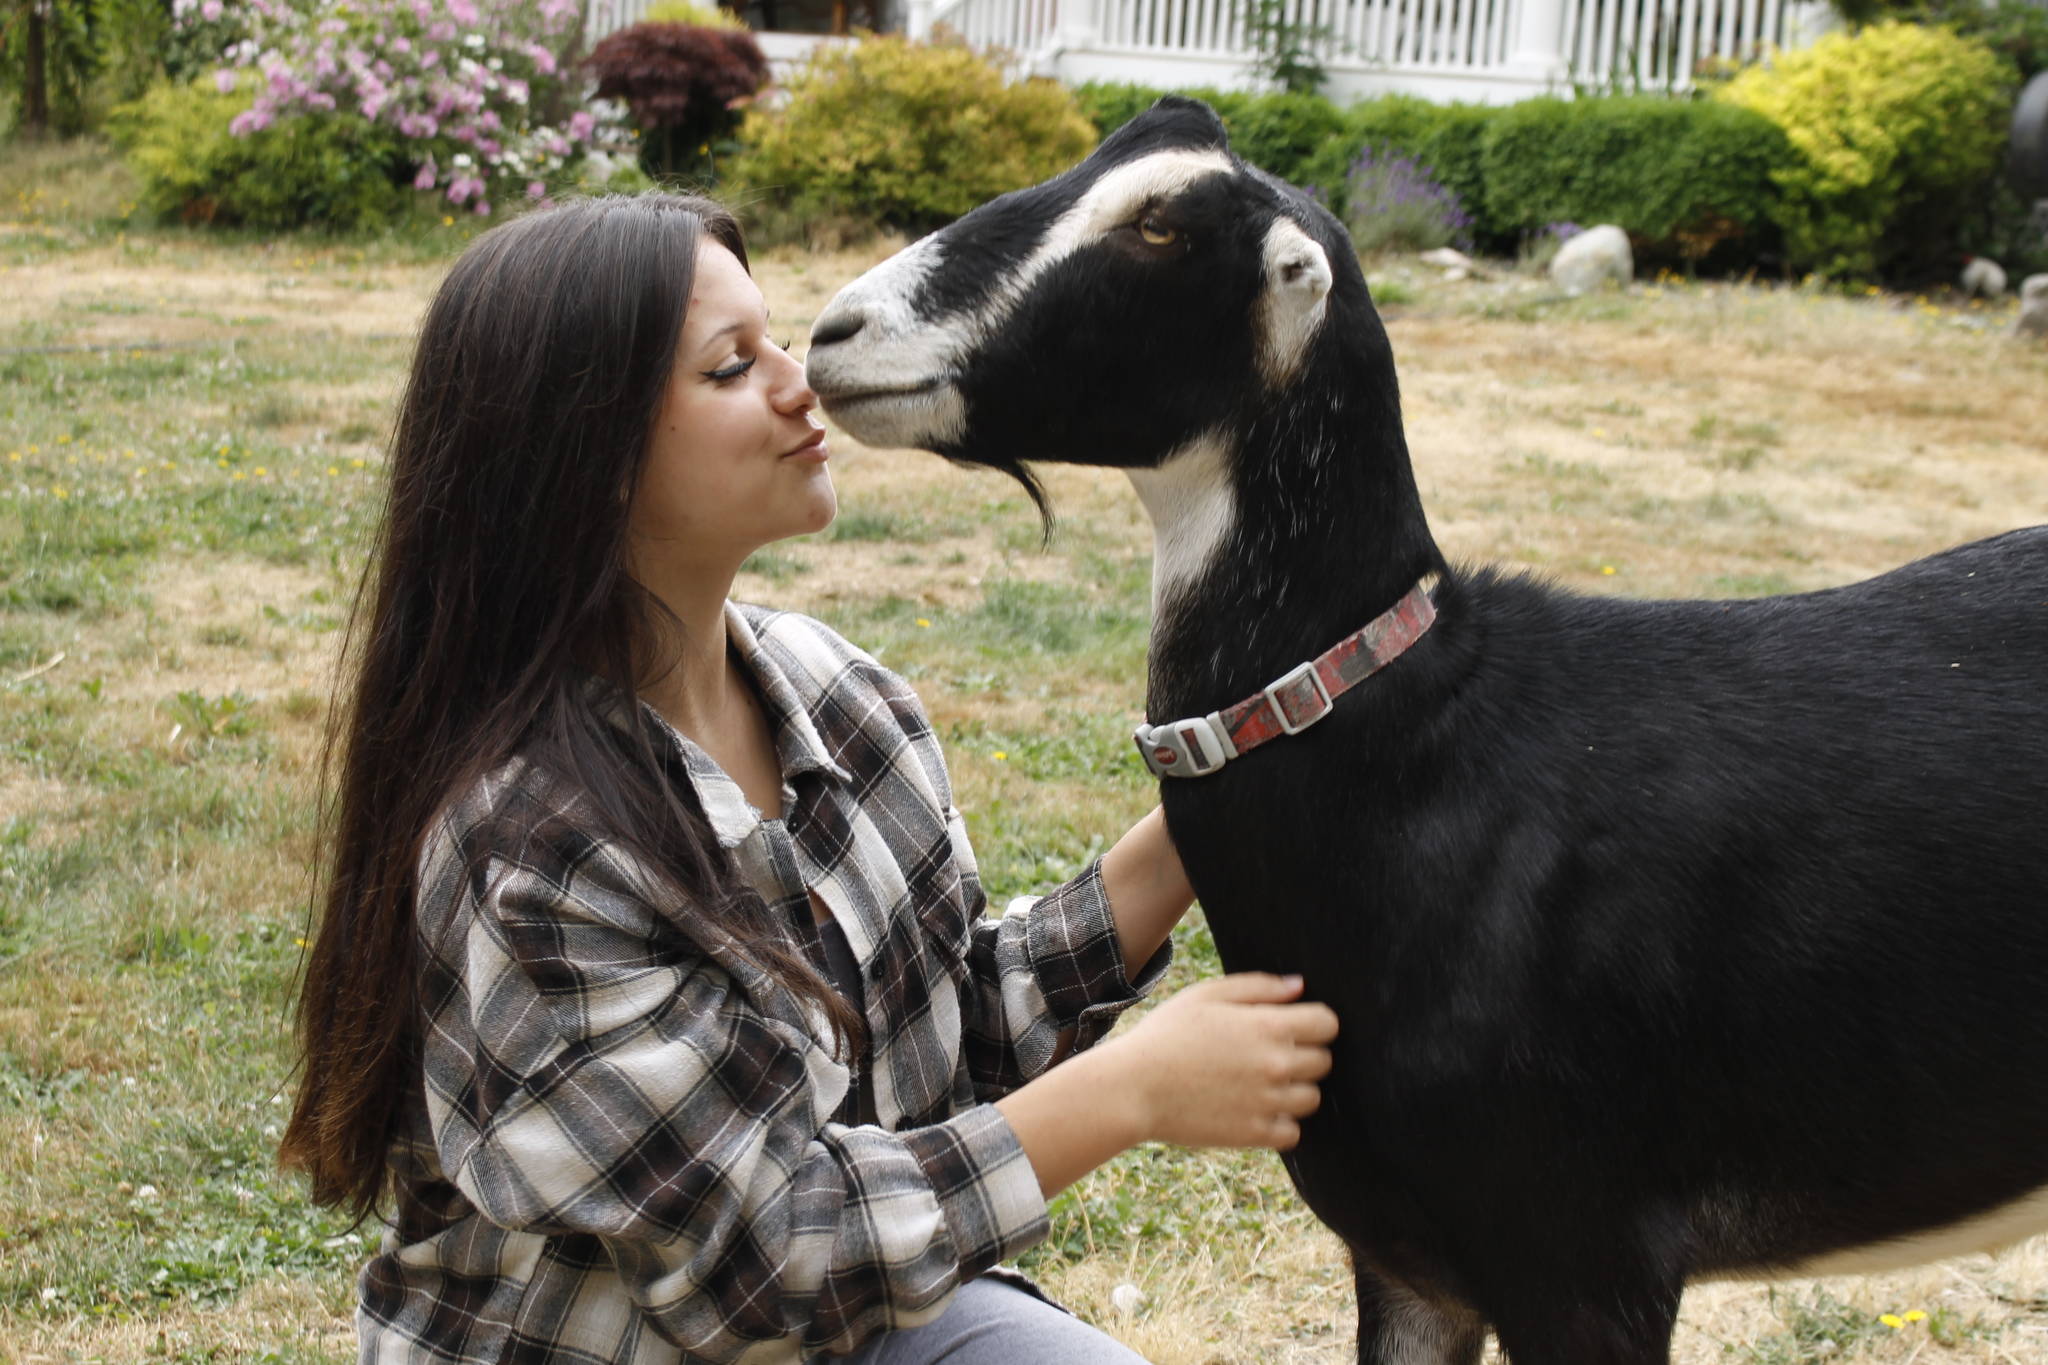 Photo by Kira Erickson
Kayla Bodenhafer, 15, with Kenny, a goat who broke his leg and avoided a death sentence earlier this year. The Bodenhafers refused to put him down and instead made him a cast. In years past, he has been at the Whidbey Island Fair.